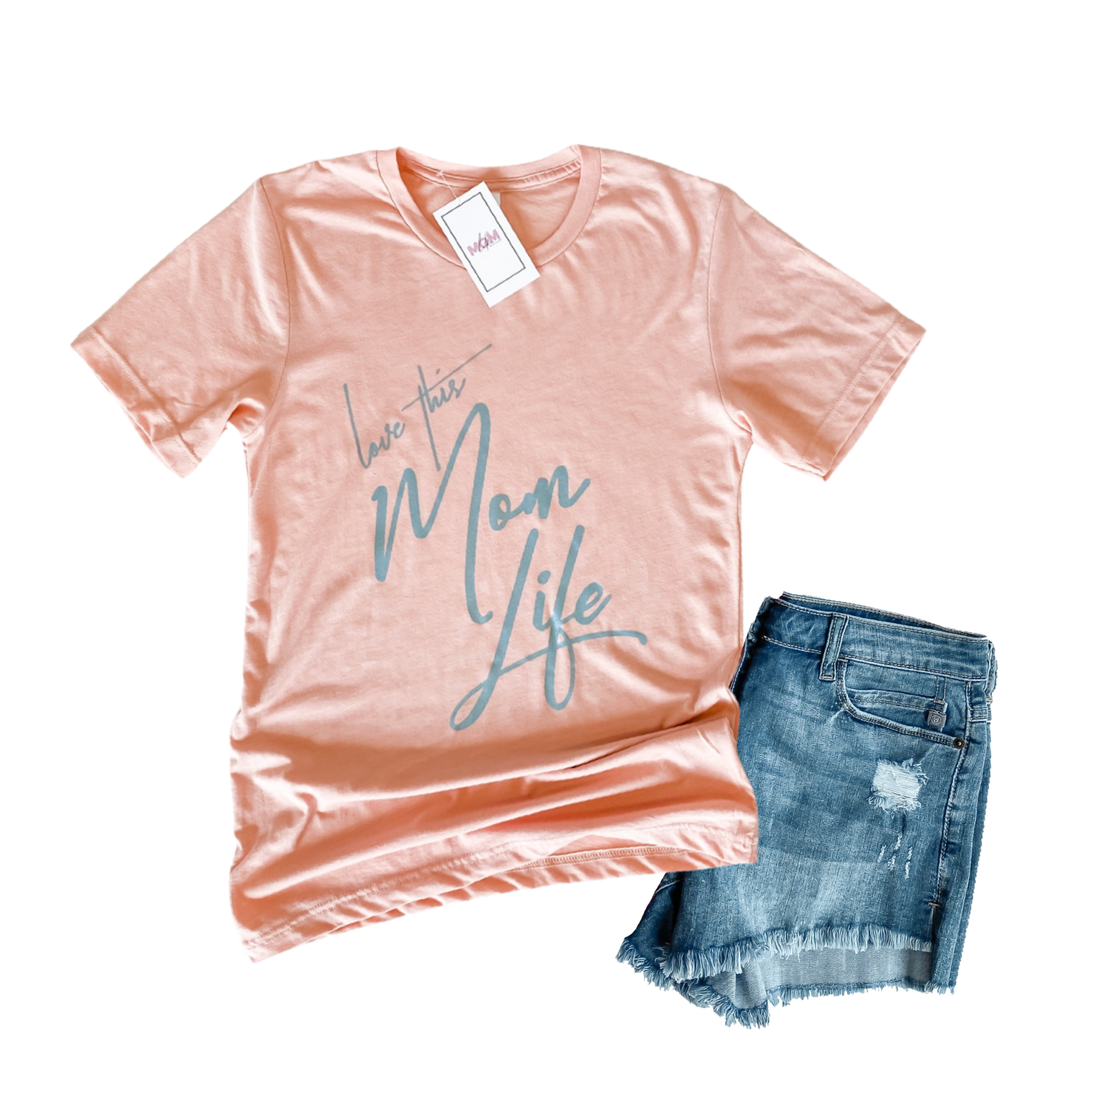 Love this Mom Life - Peach Paige Tee (3X only)